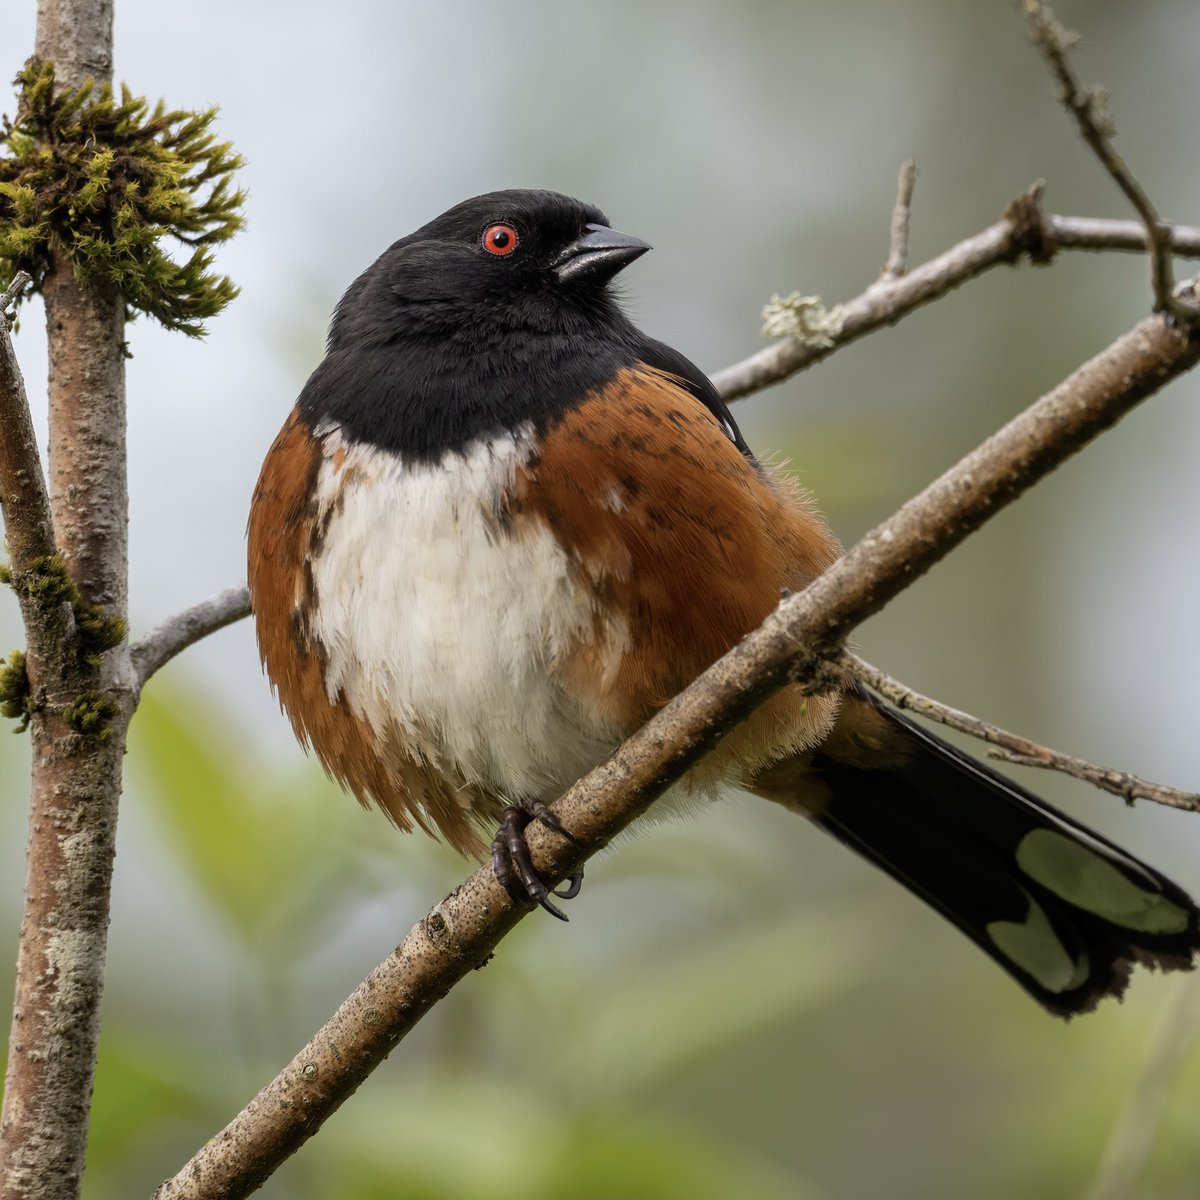 Spotted towhee 🤎 love hearing these guys rustling through the leaf litter. That red eye though!!  

#spottedtowhee #birds #birdphotography #twitternaturecommunity